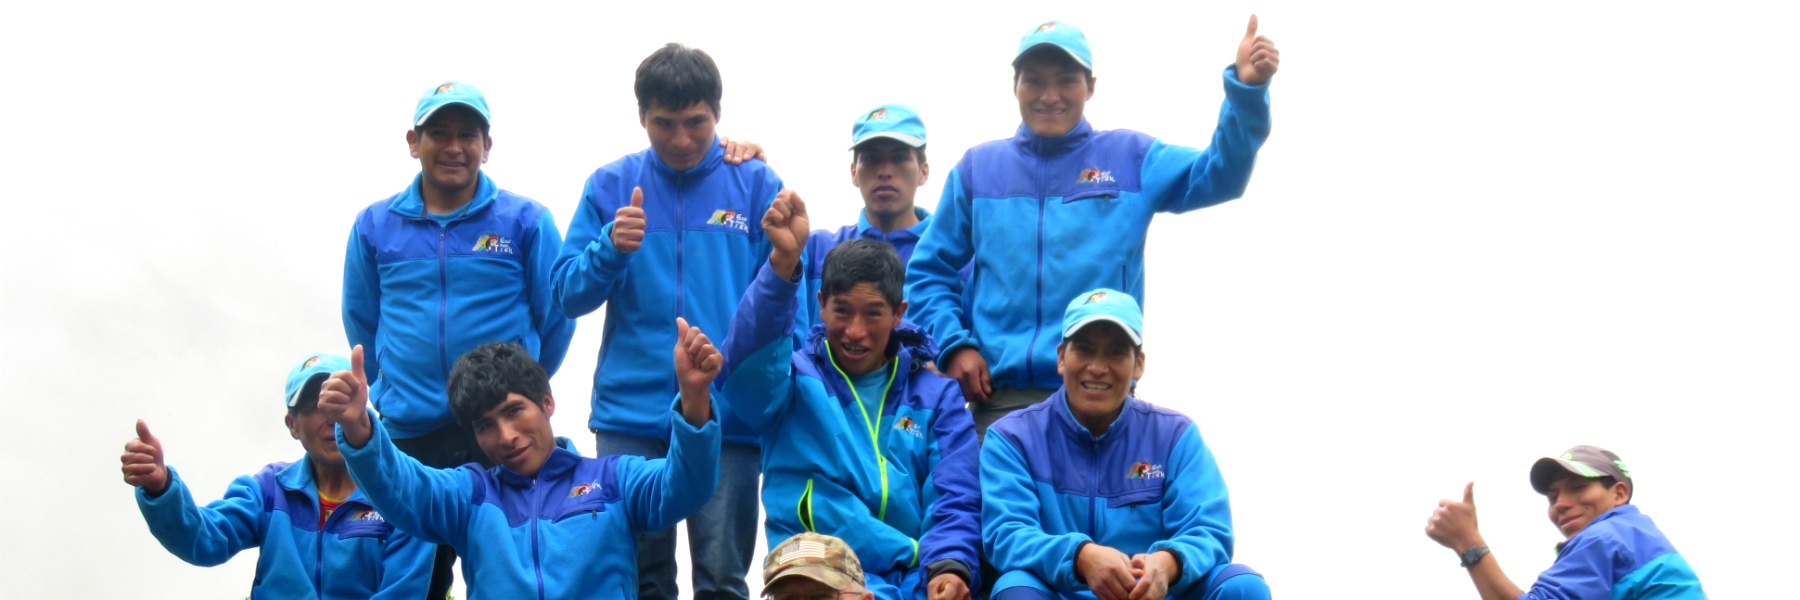 OUR INCA TRAIL PORTERS